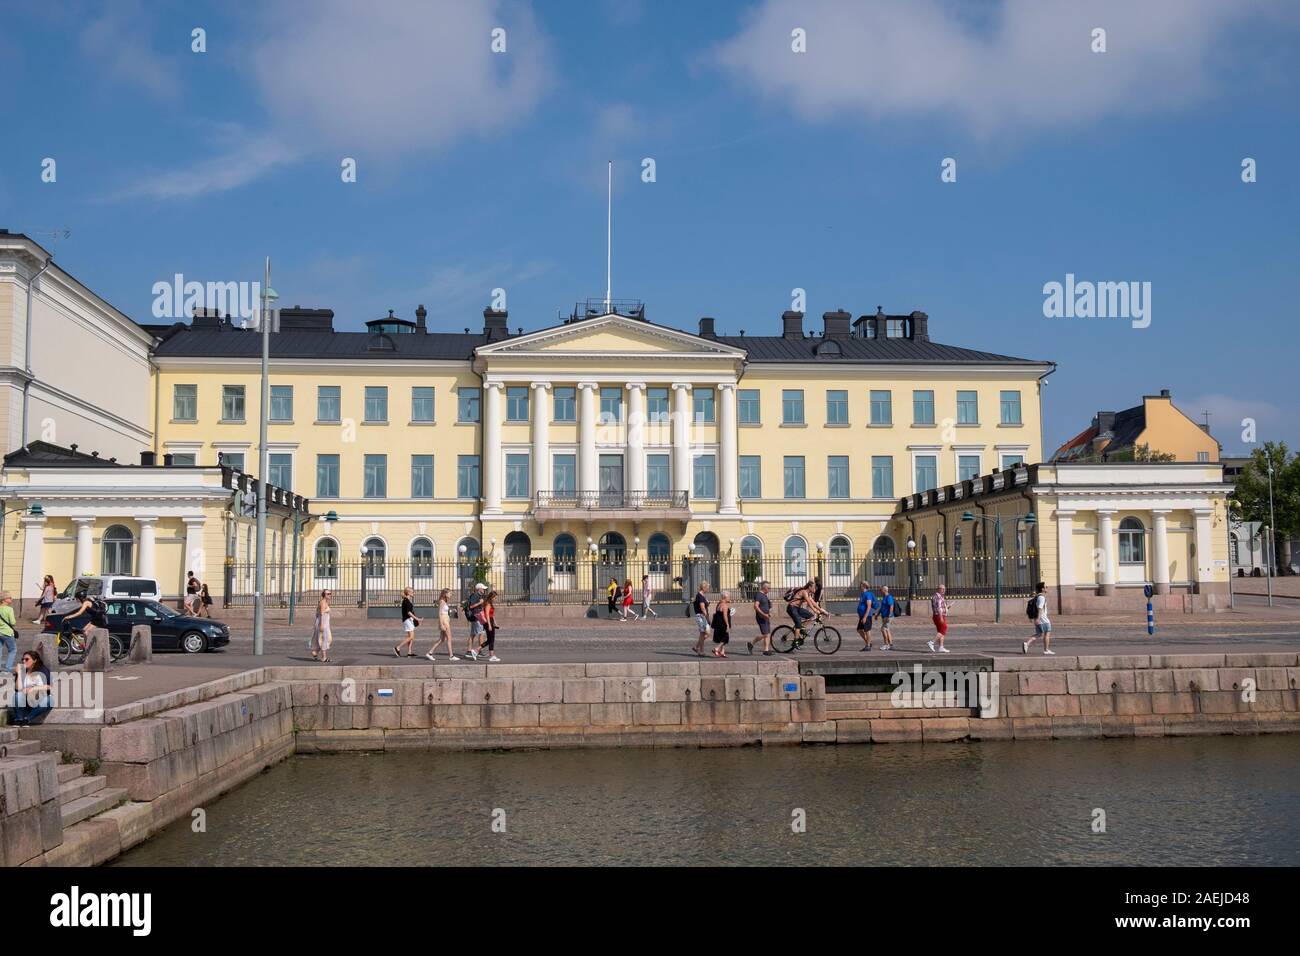 View of South Harbour with Presidential Palace in the background, Helsinki, Finland,Scandinavia, Europe Stock Photo